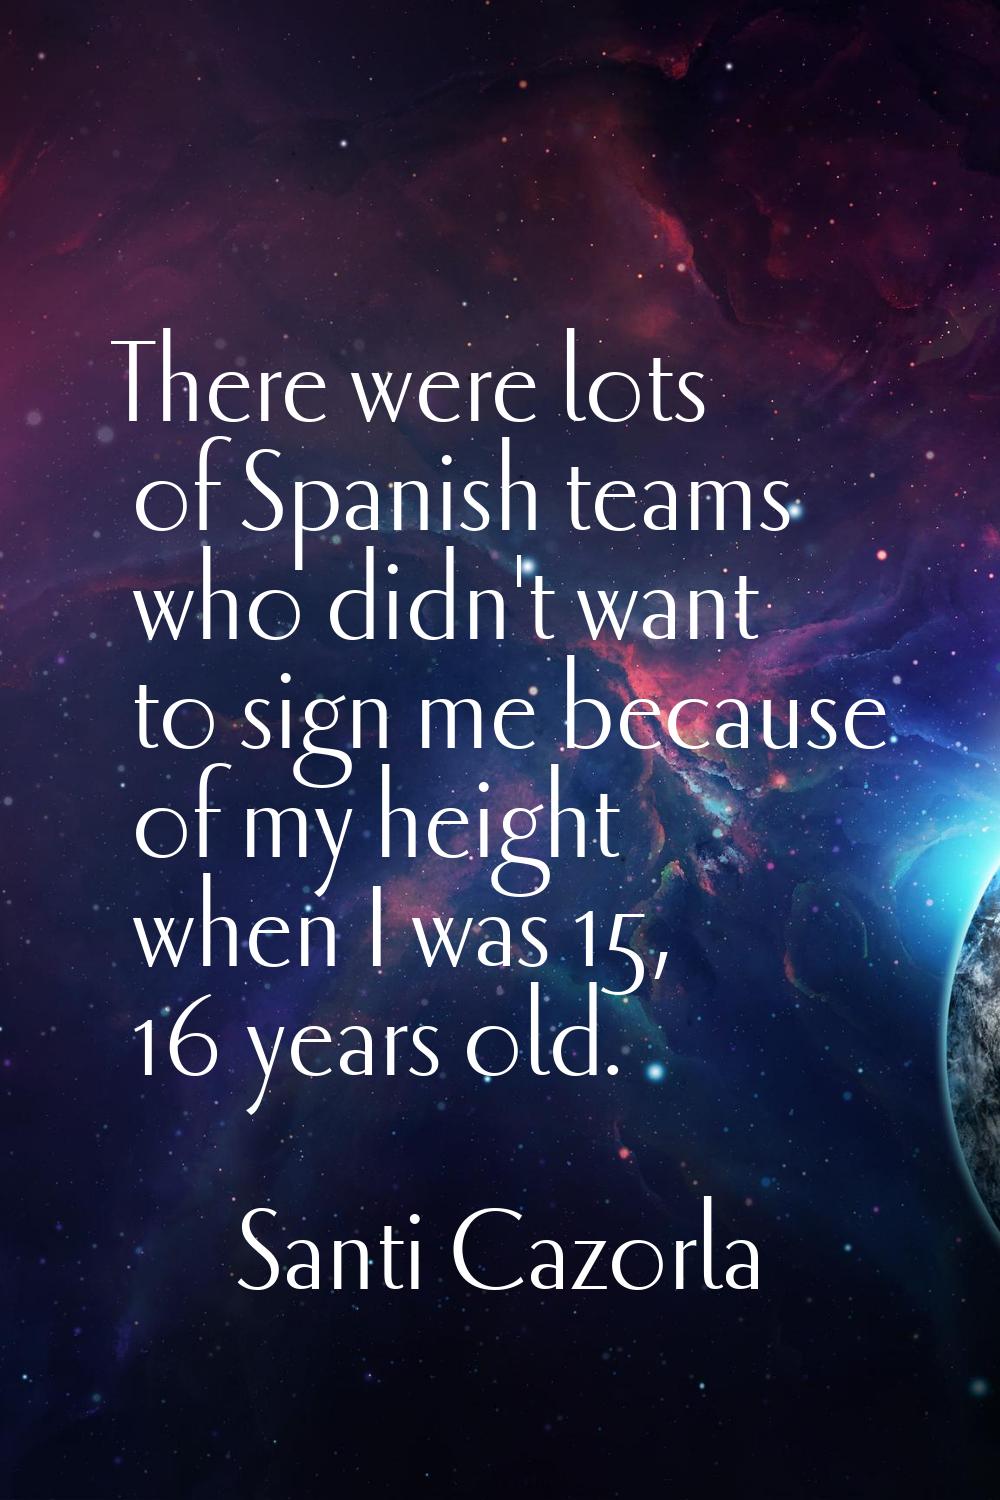 There were lots of Spanish teams who didn't want to sign me because of my height when I was 15, 16 